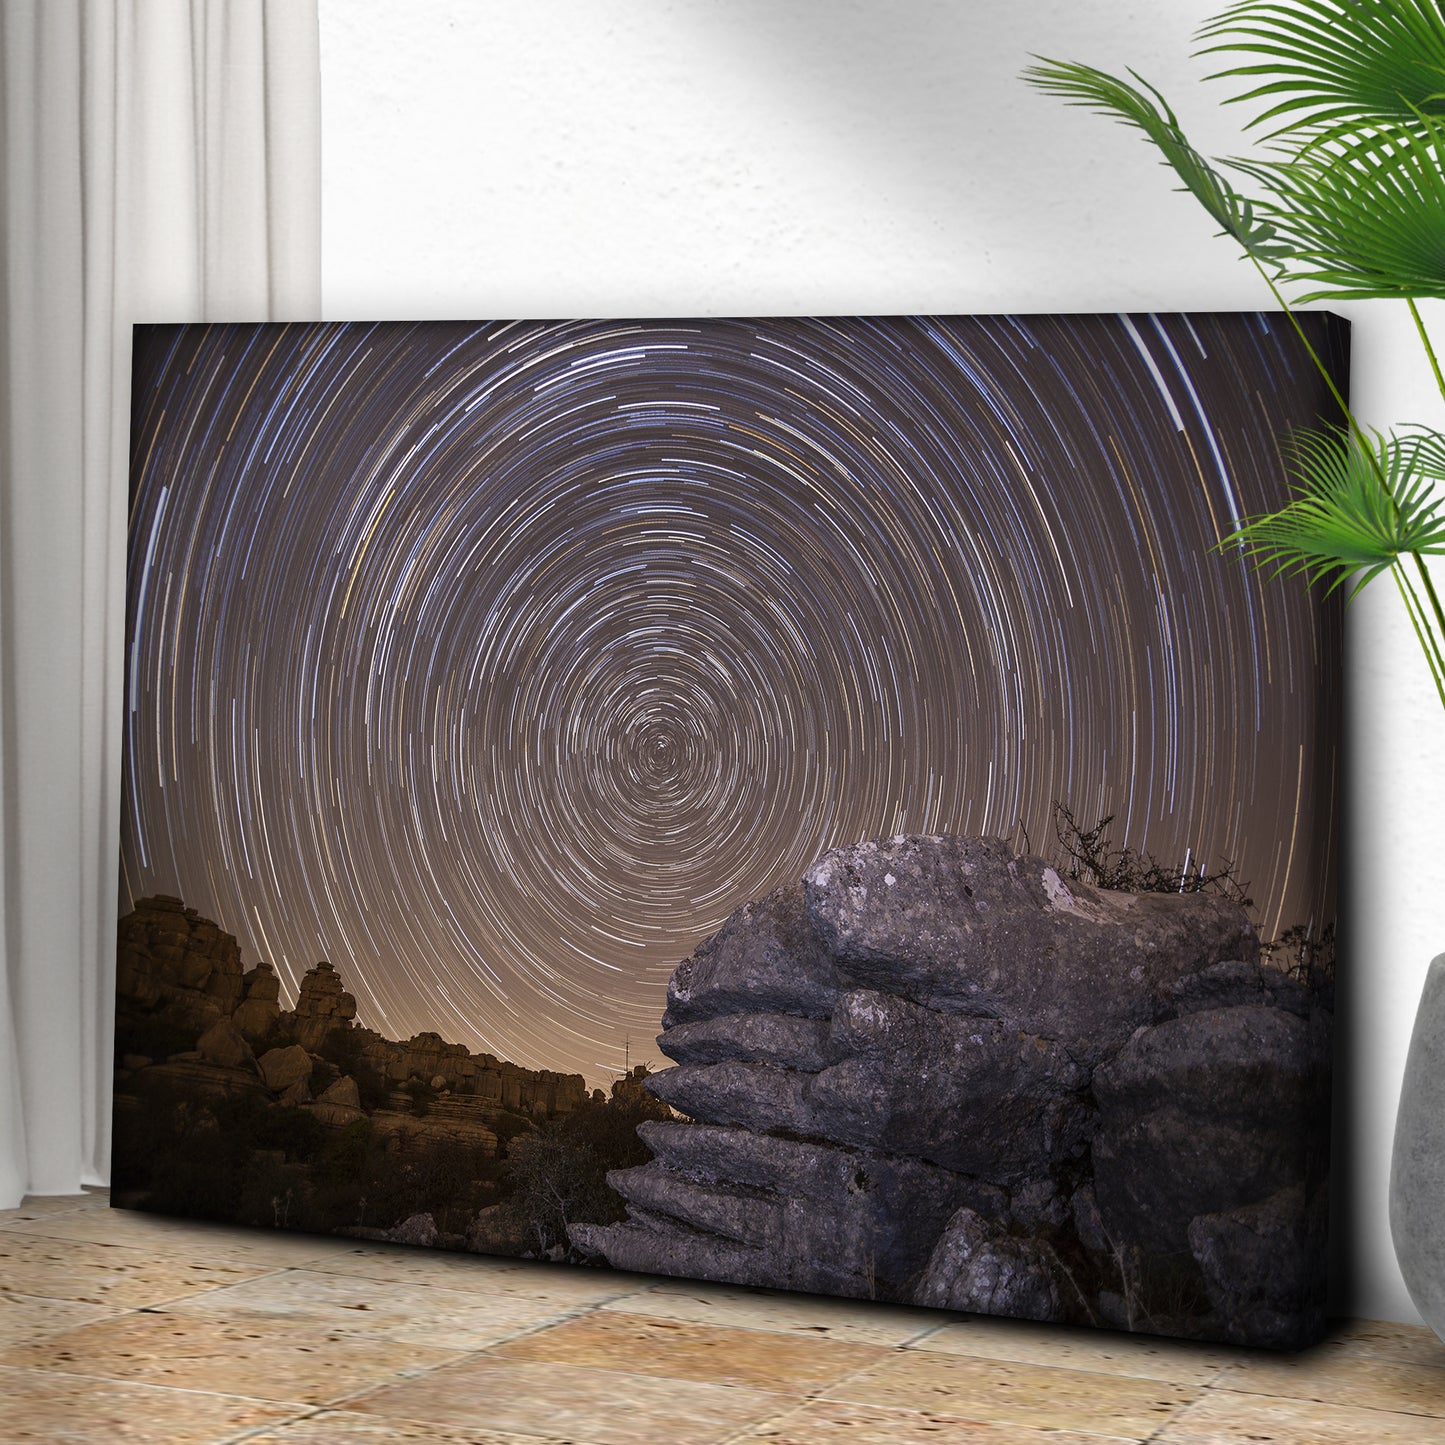 Star Trails Canvas Wall Art Style 2 - Image by Tailored Canvases